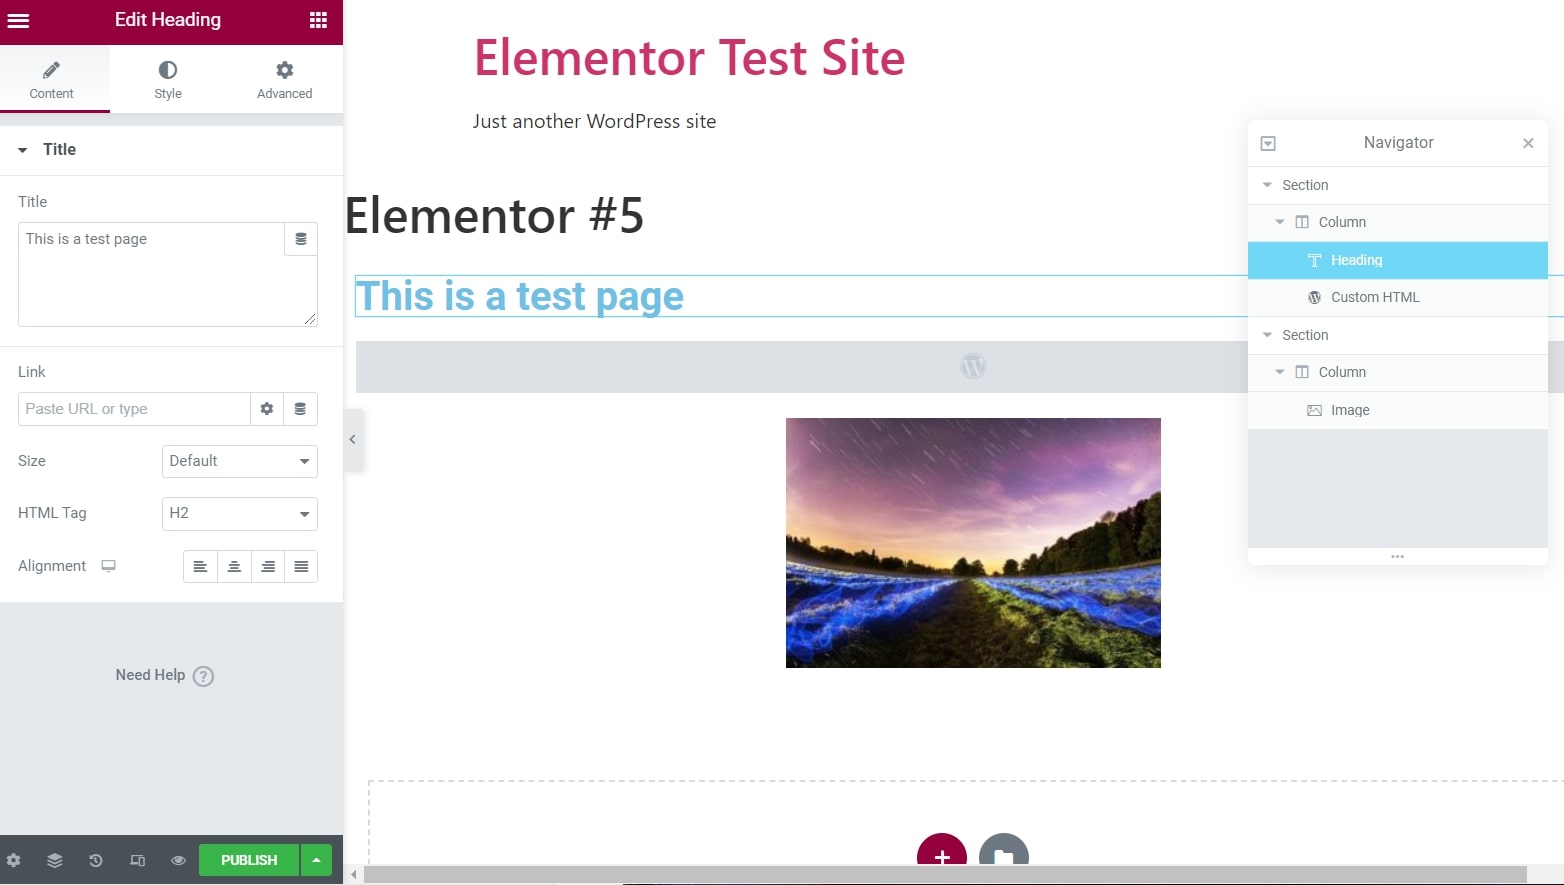 Elementor's site editor in use